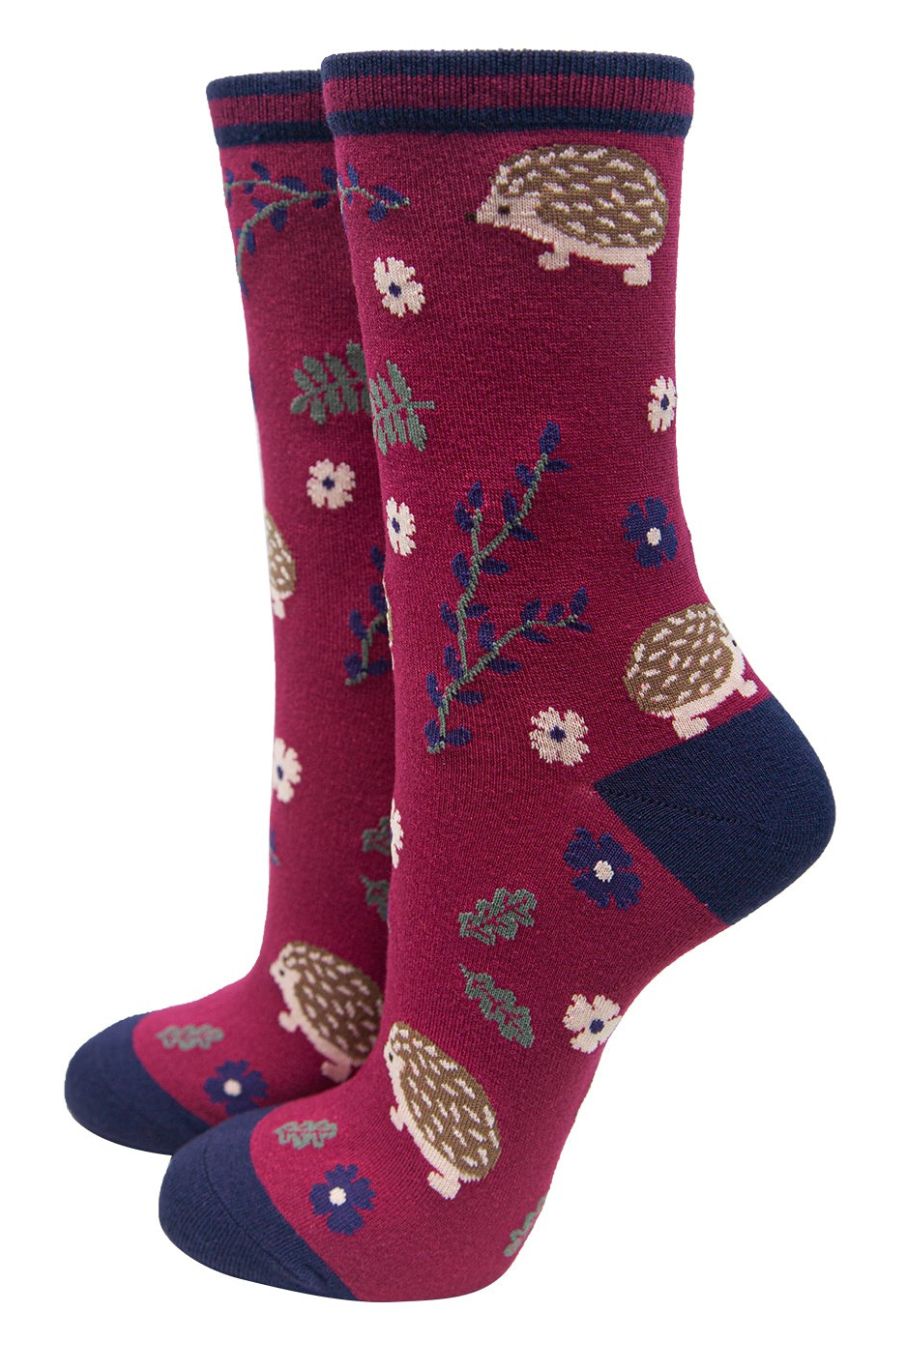 deep pink and navy blue ankle socks with brown hedgehods and floral print